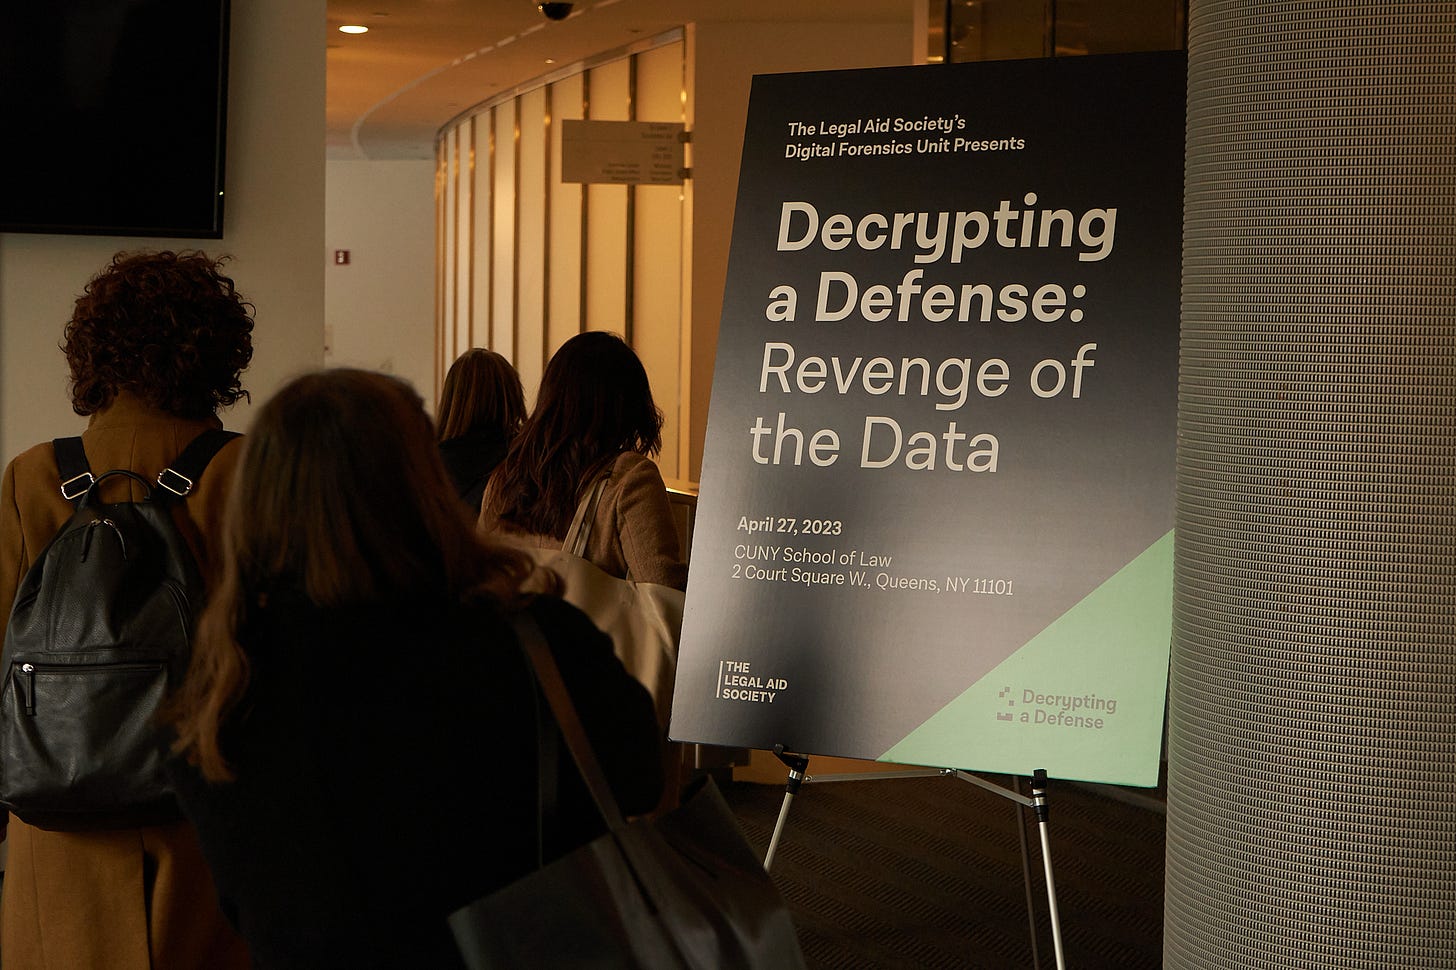 Attendees walking past the Decrypting a Defense: Revenge of the Data welcome sign.